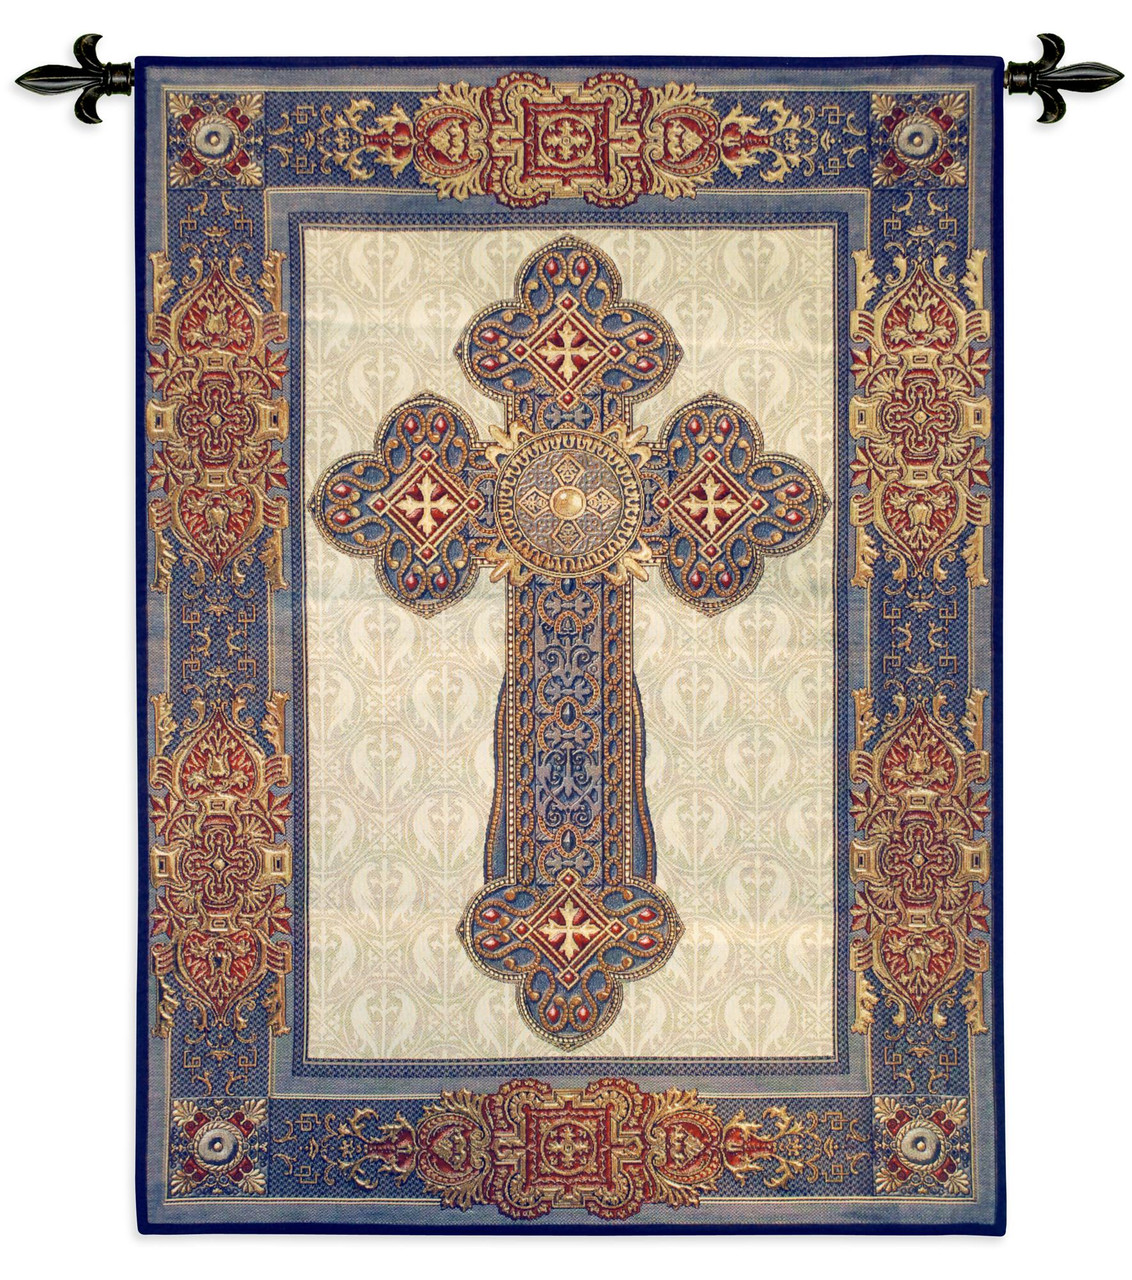 Gothic Cross by Acorn Studio Woven Tapestry Wall Art Hanging Gothic  Cross in Dramatic Blues and Reds 100% Cotton USA Size 53x38